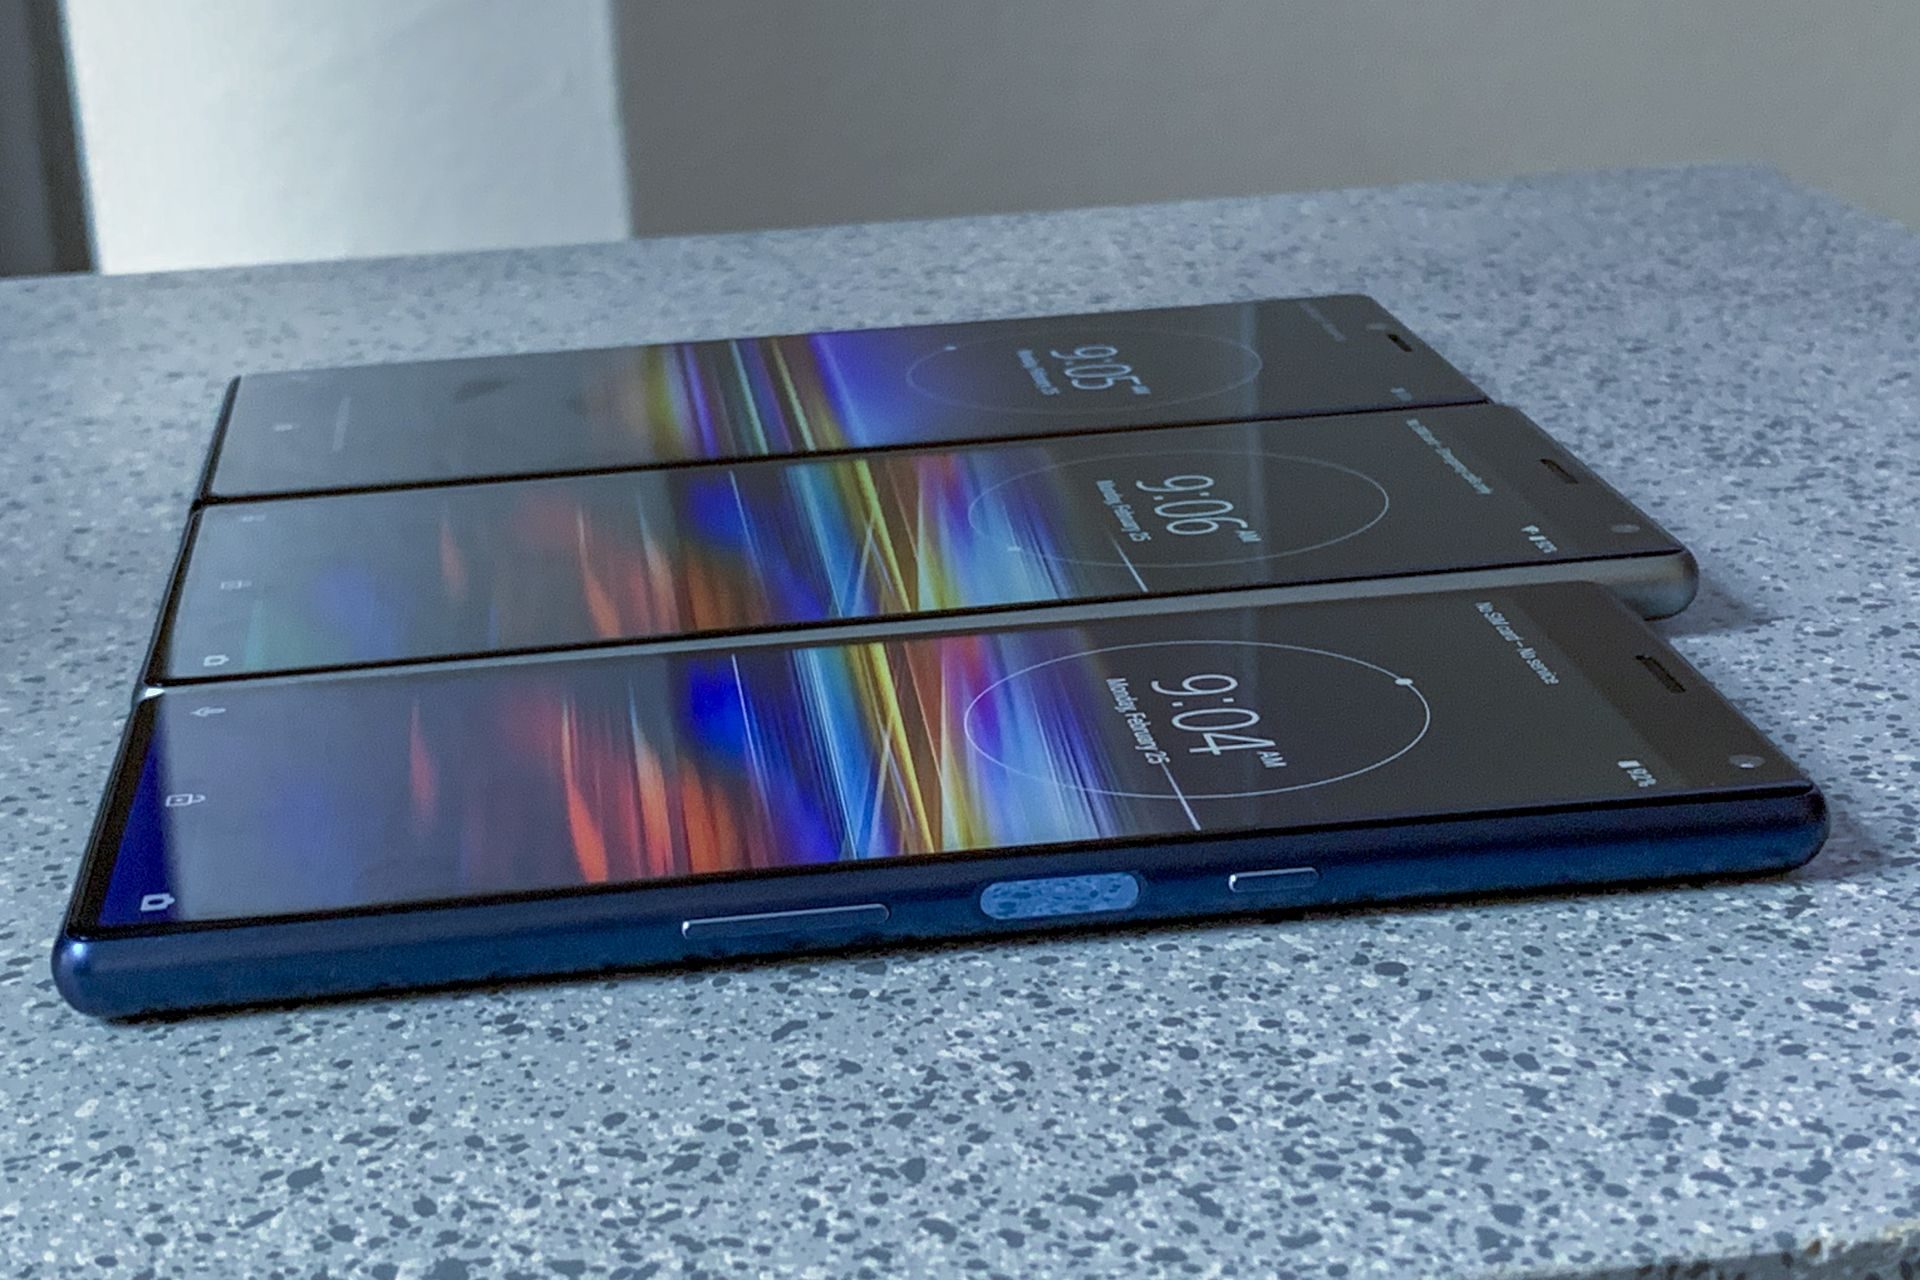 MWC 2019: Ny start for Sony Xperia